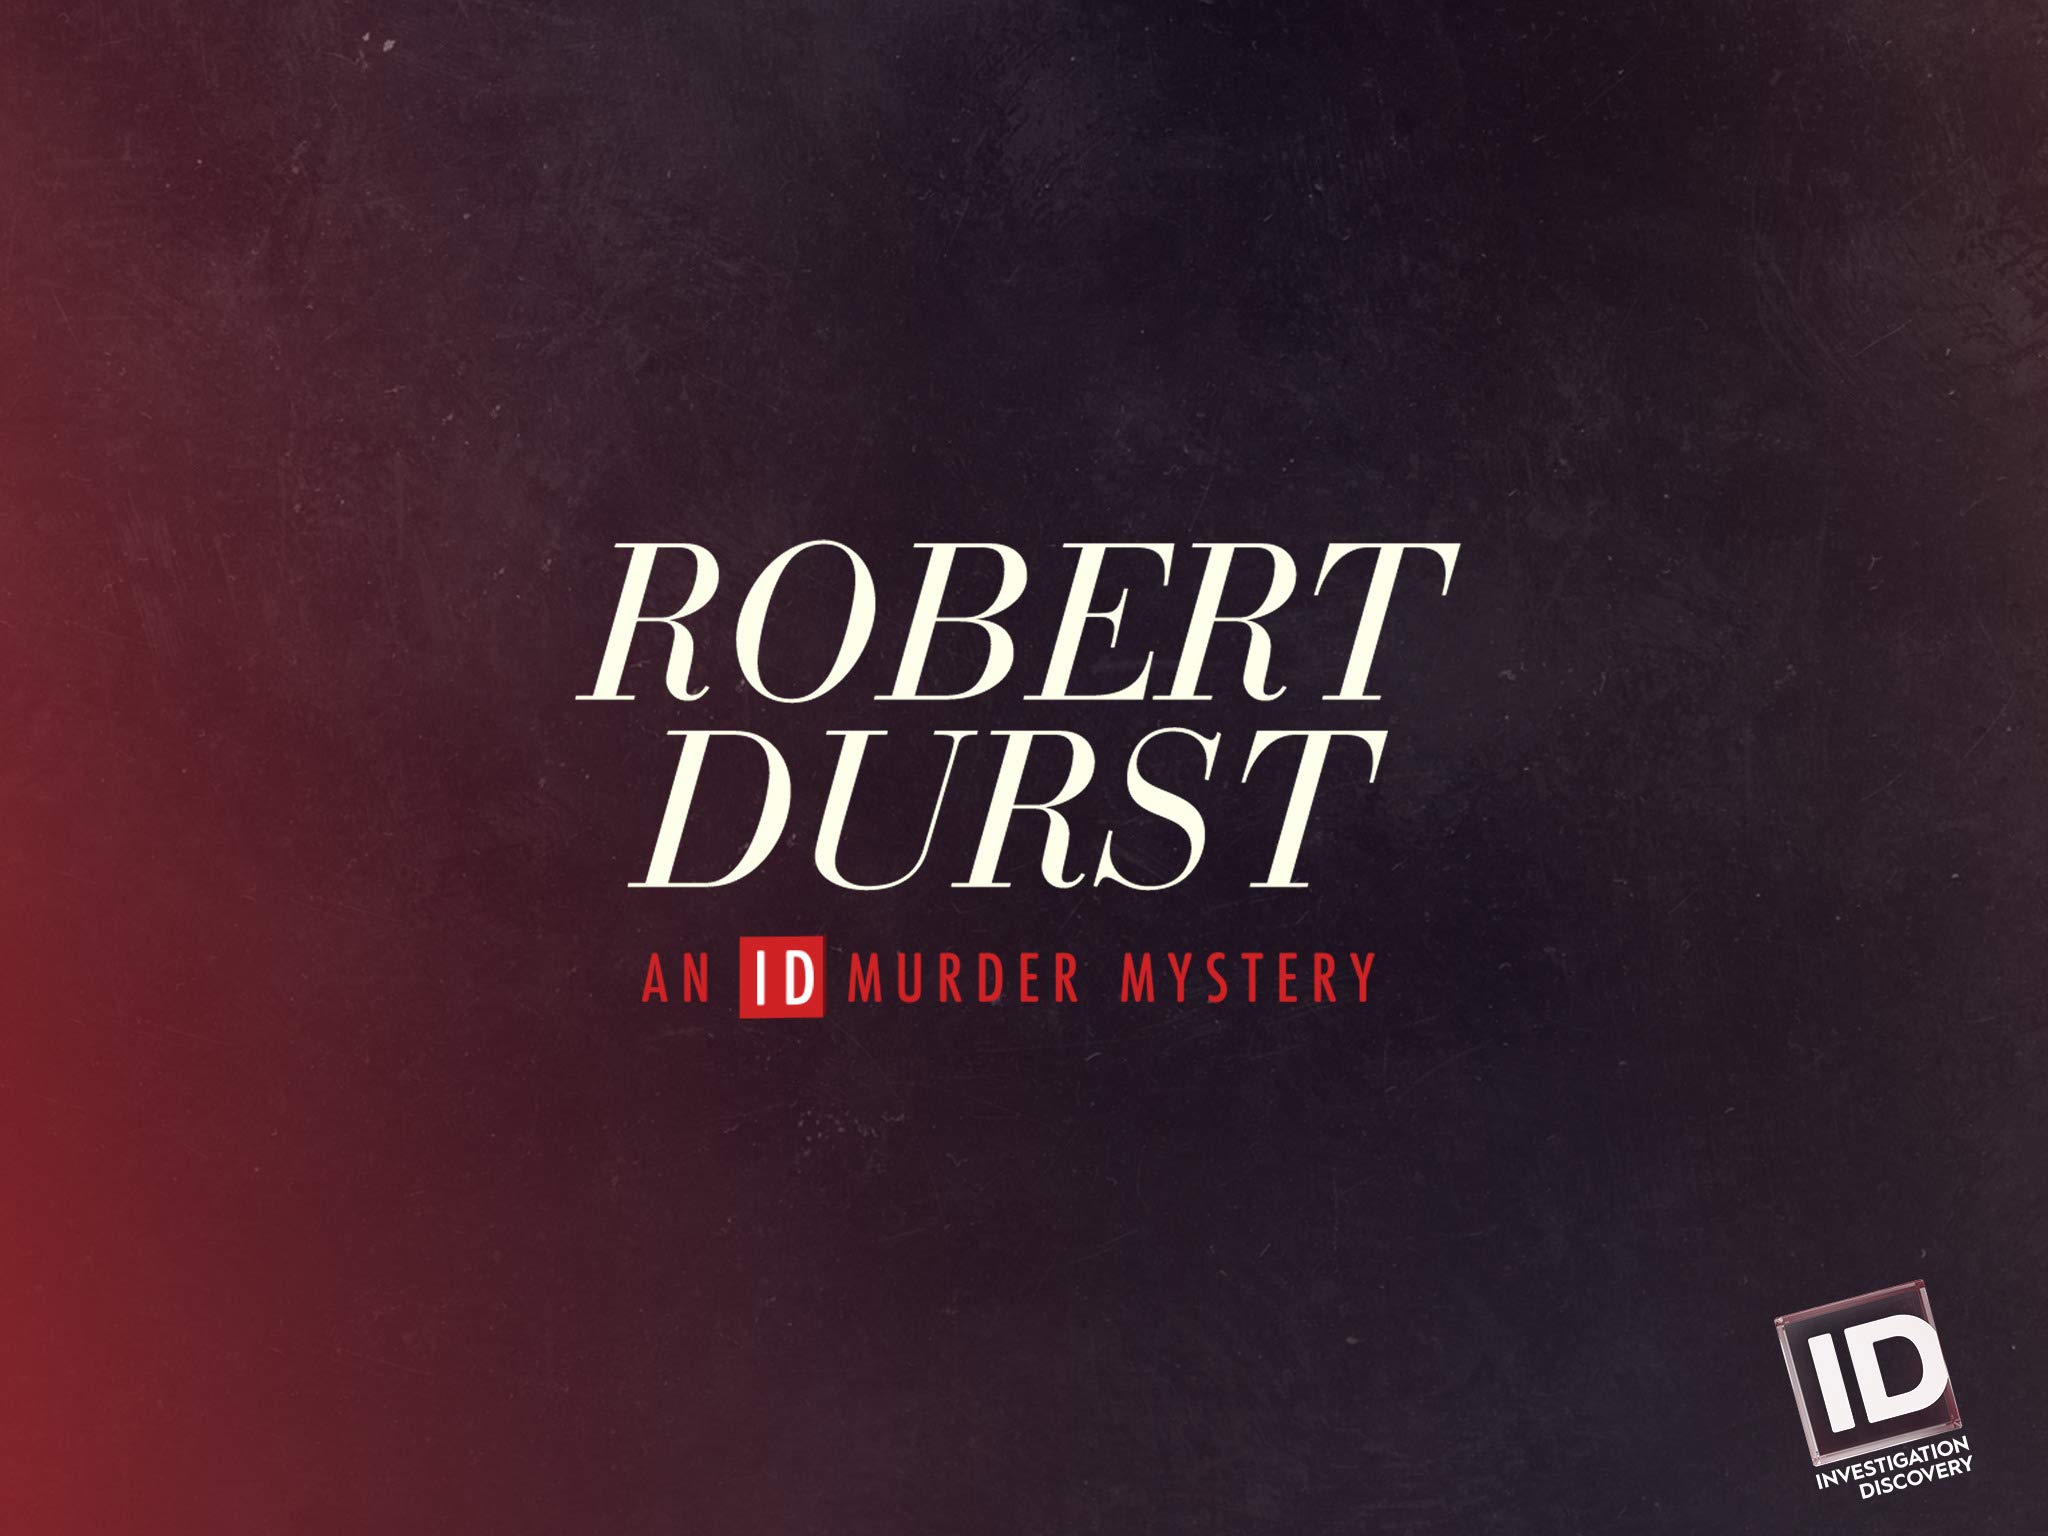 TV ratings for Robert Durst: An Id Murder Mystery in Chile. investigation discovery TV series